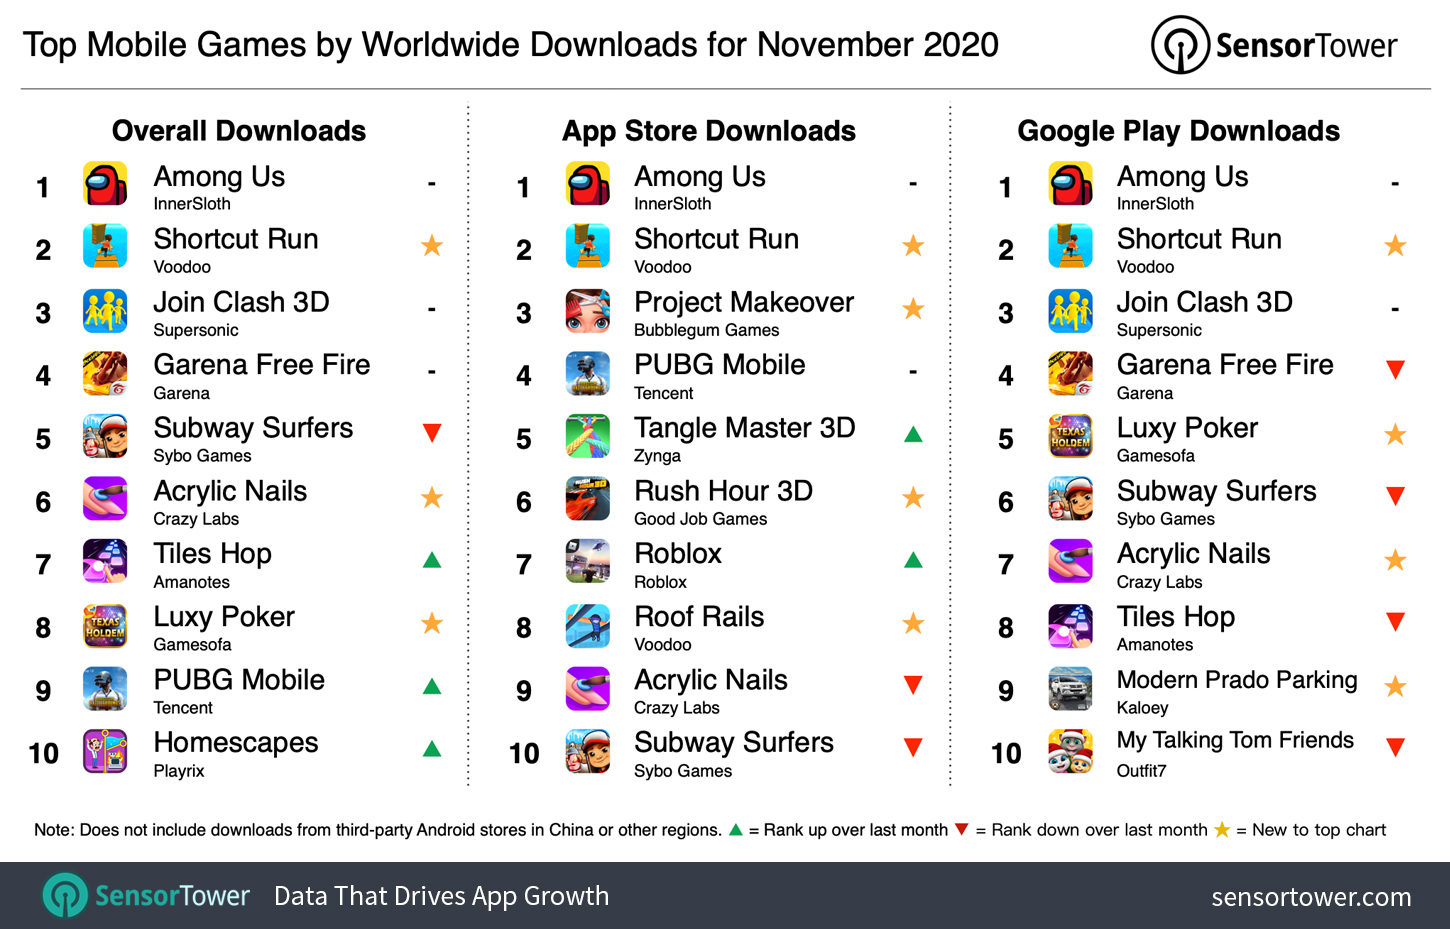 Top Mobile Games Worldwide for November 2020 by Downloads